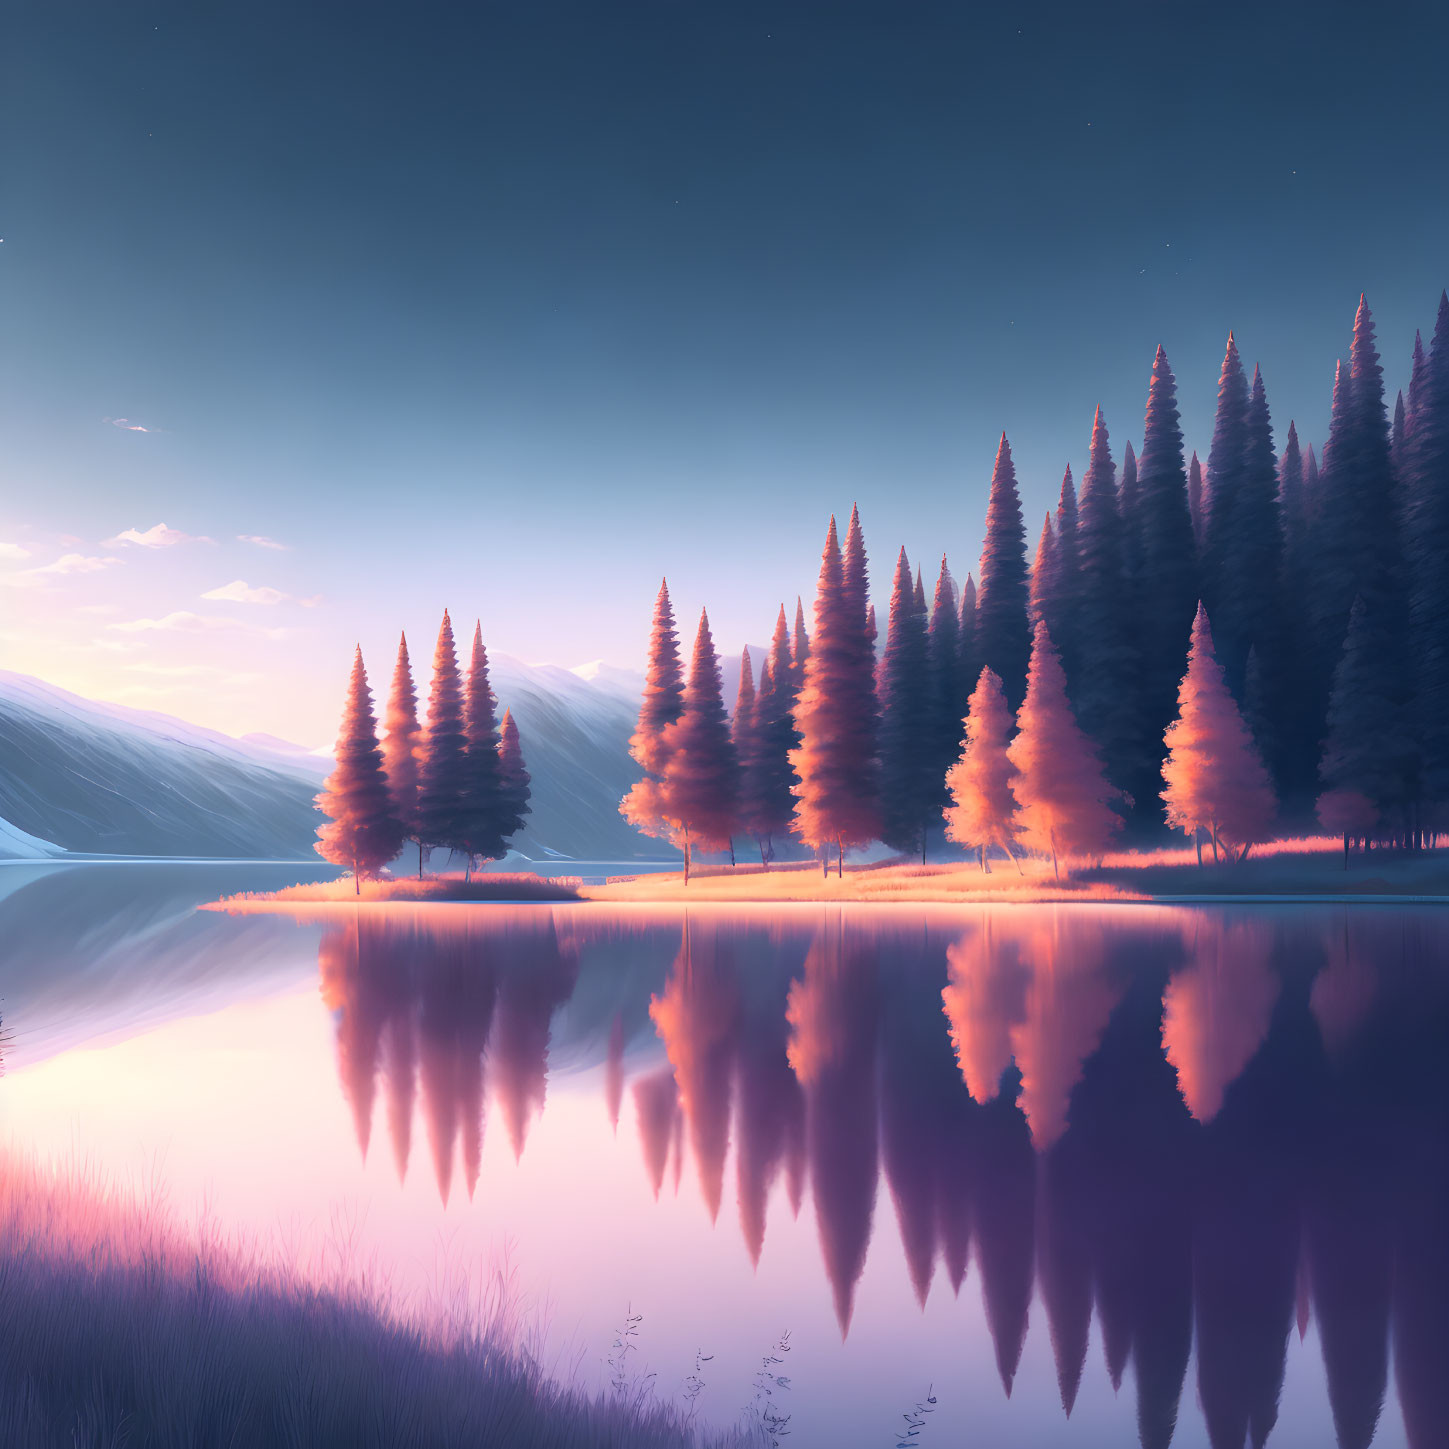 Tranquil twilight landscape with reflective lake and pink pine trees